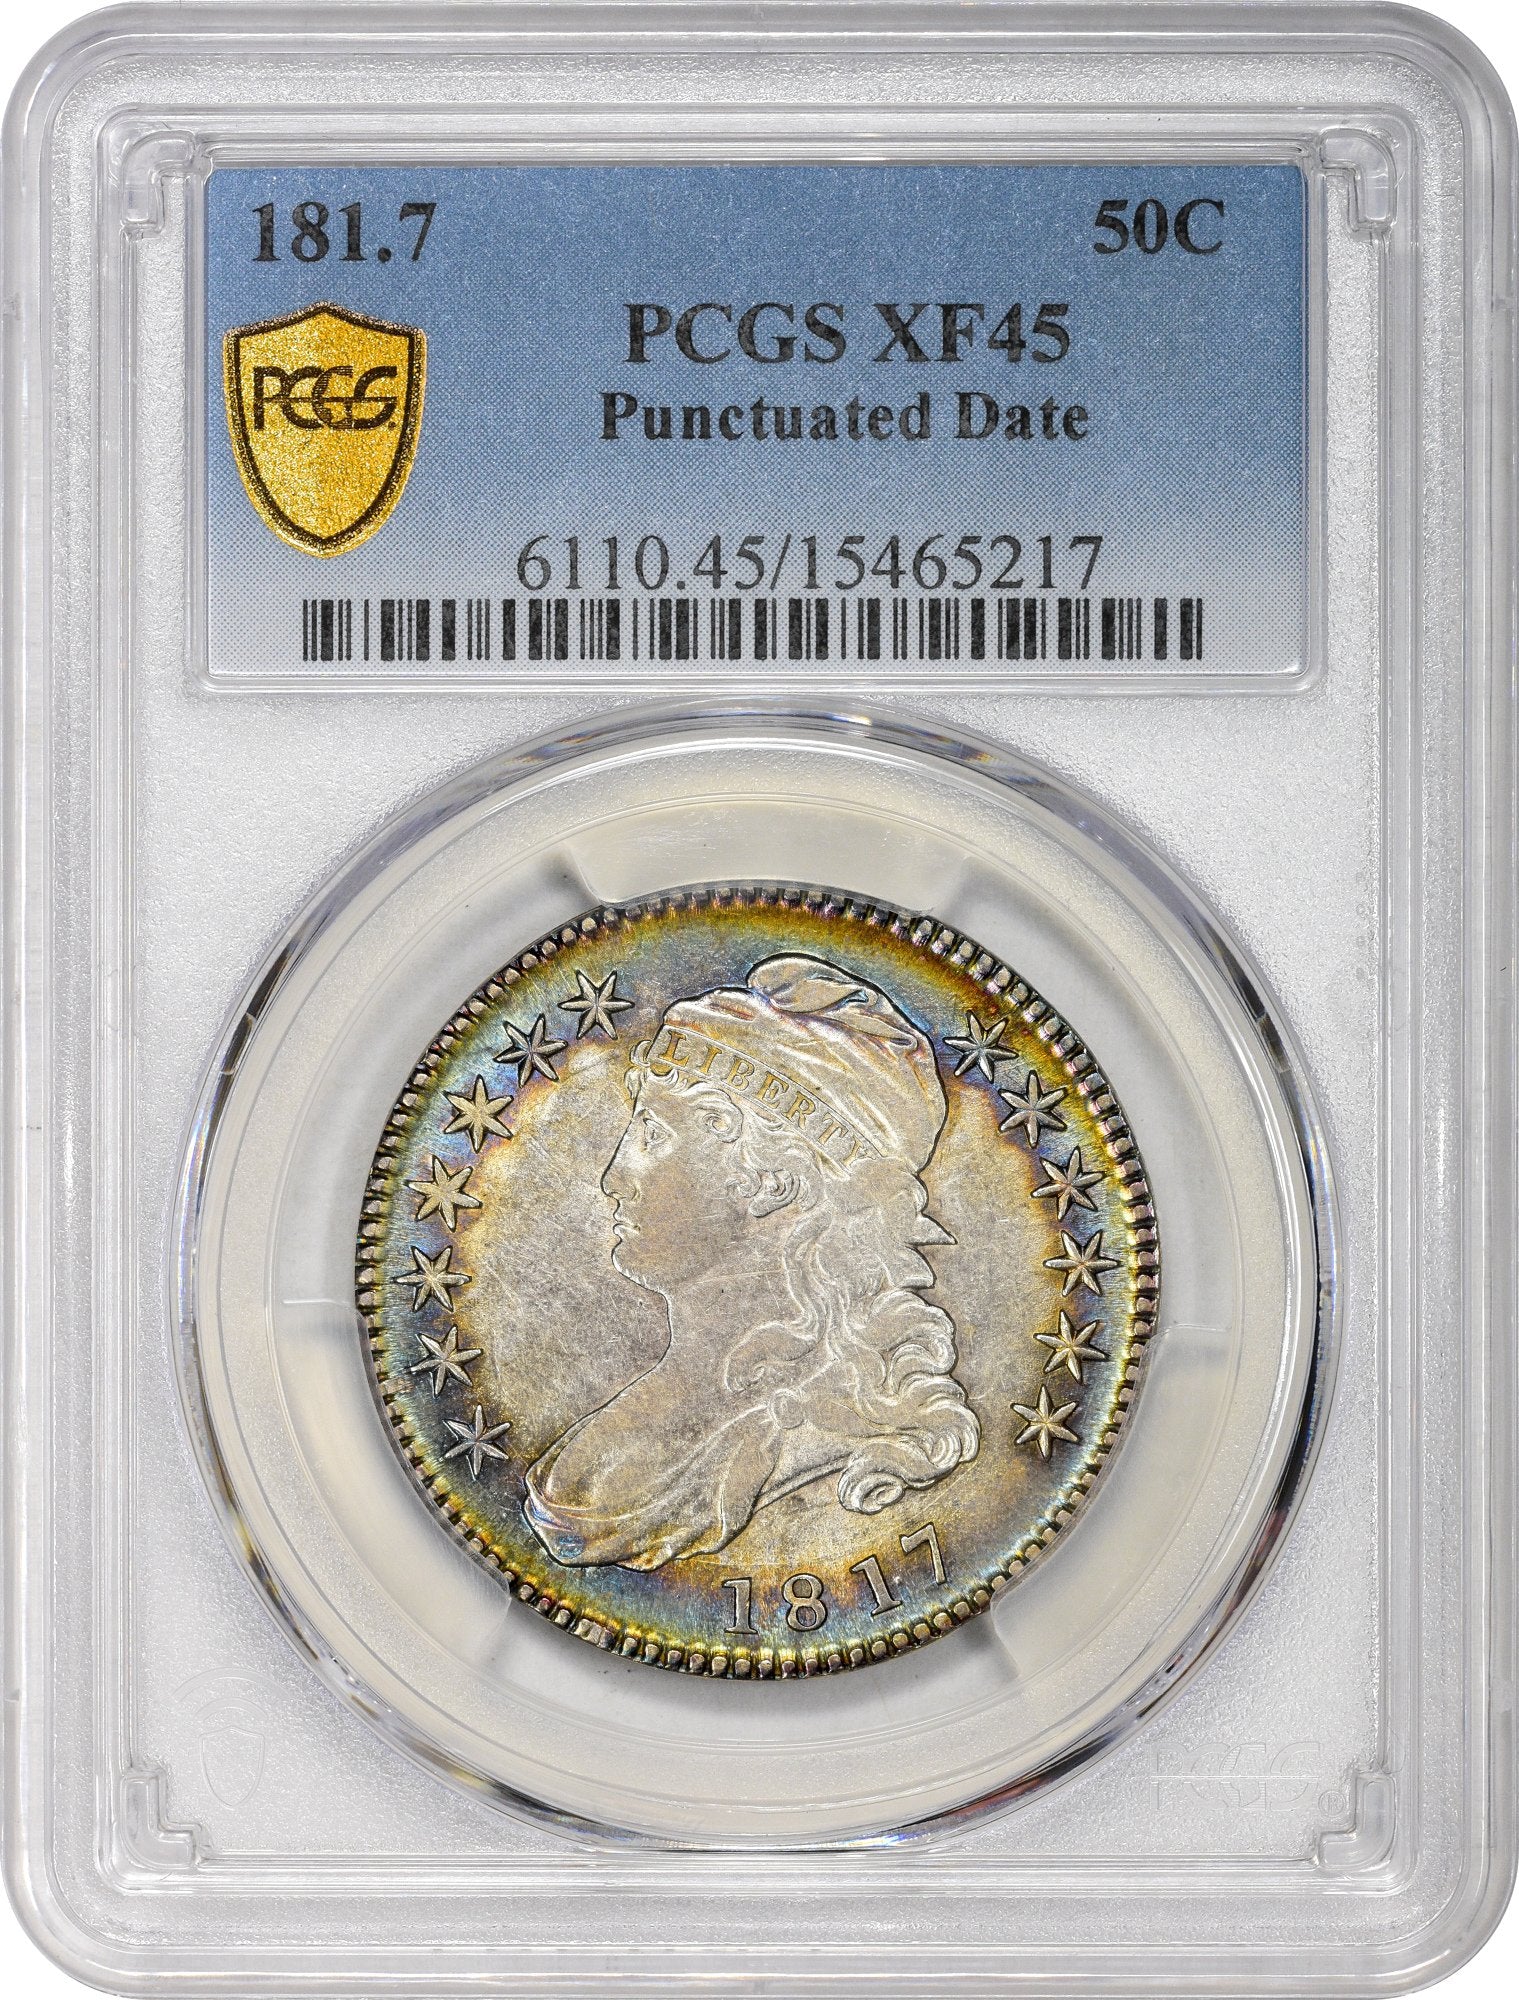 181.7 50C PUNCTUATED DATE XF45 PCGS - Paradime Coins | PCGS NGC CACG CAC Rare US Numismatic Coins For Sale